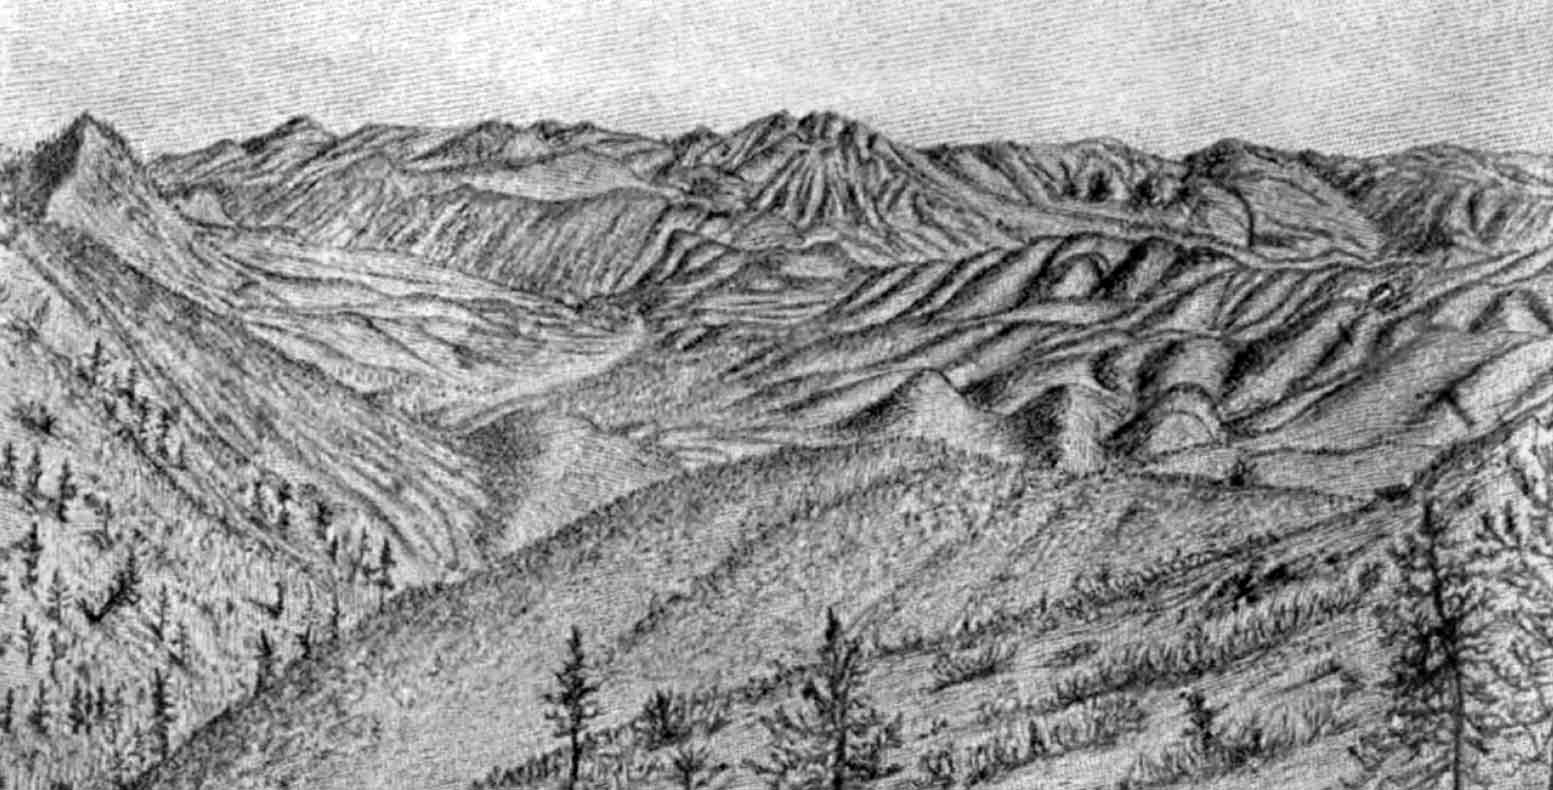 A sketch of high alpine hills and mountain ranges that stretch one after another far into the distance.